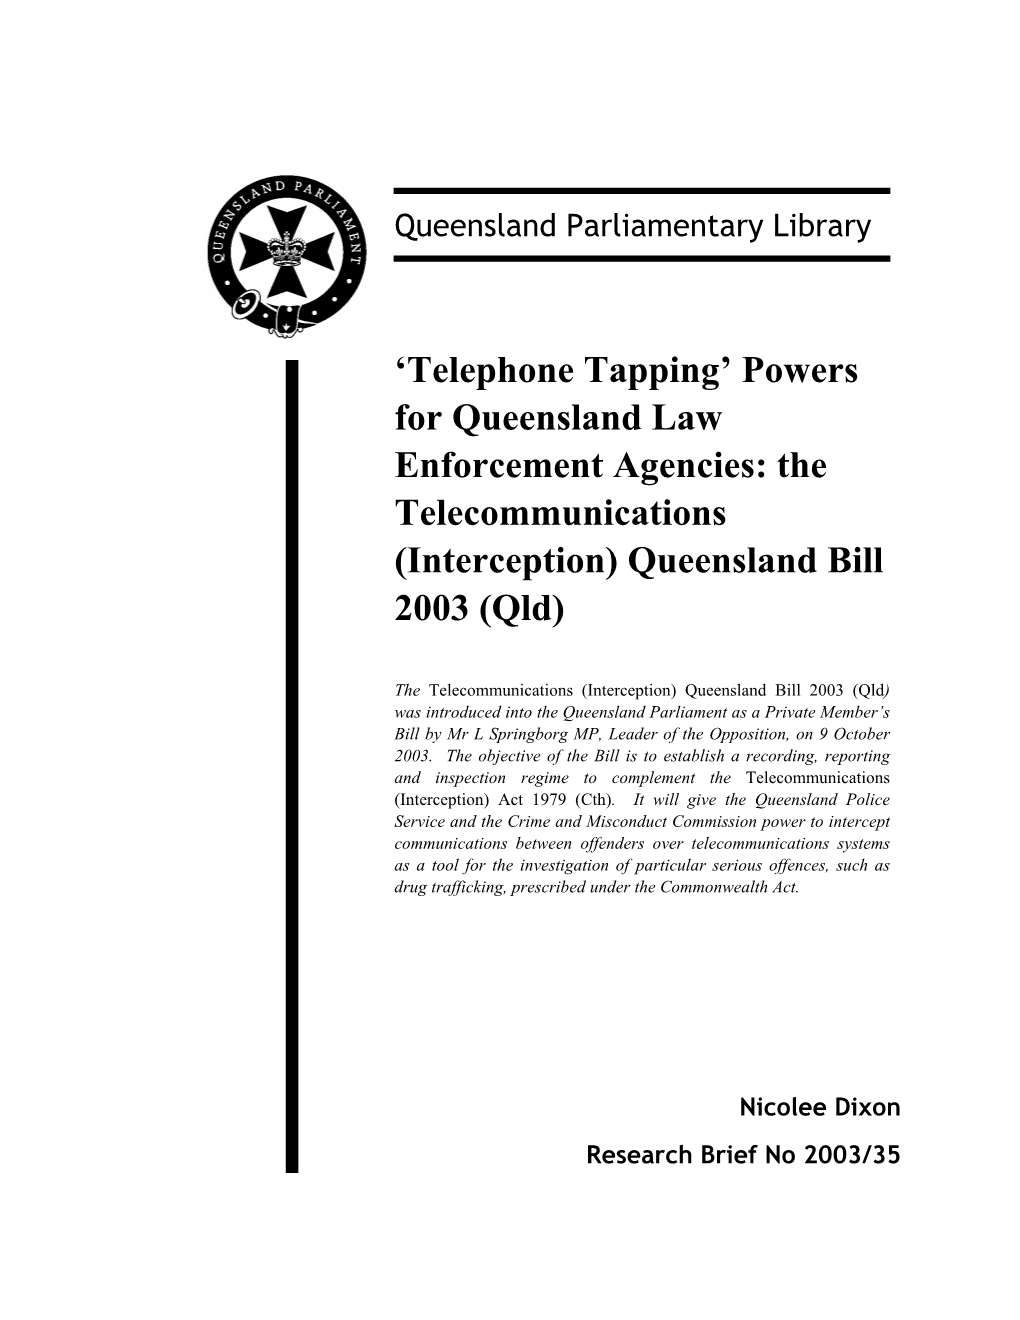 'Telephone Tapping' Powers for Queensland Law Enforcement